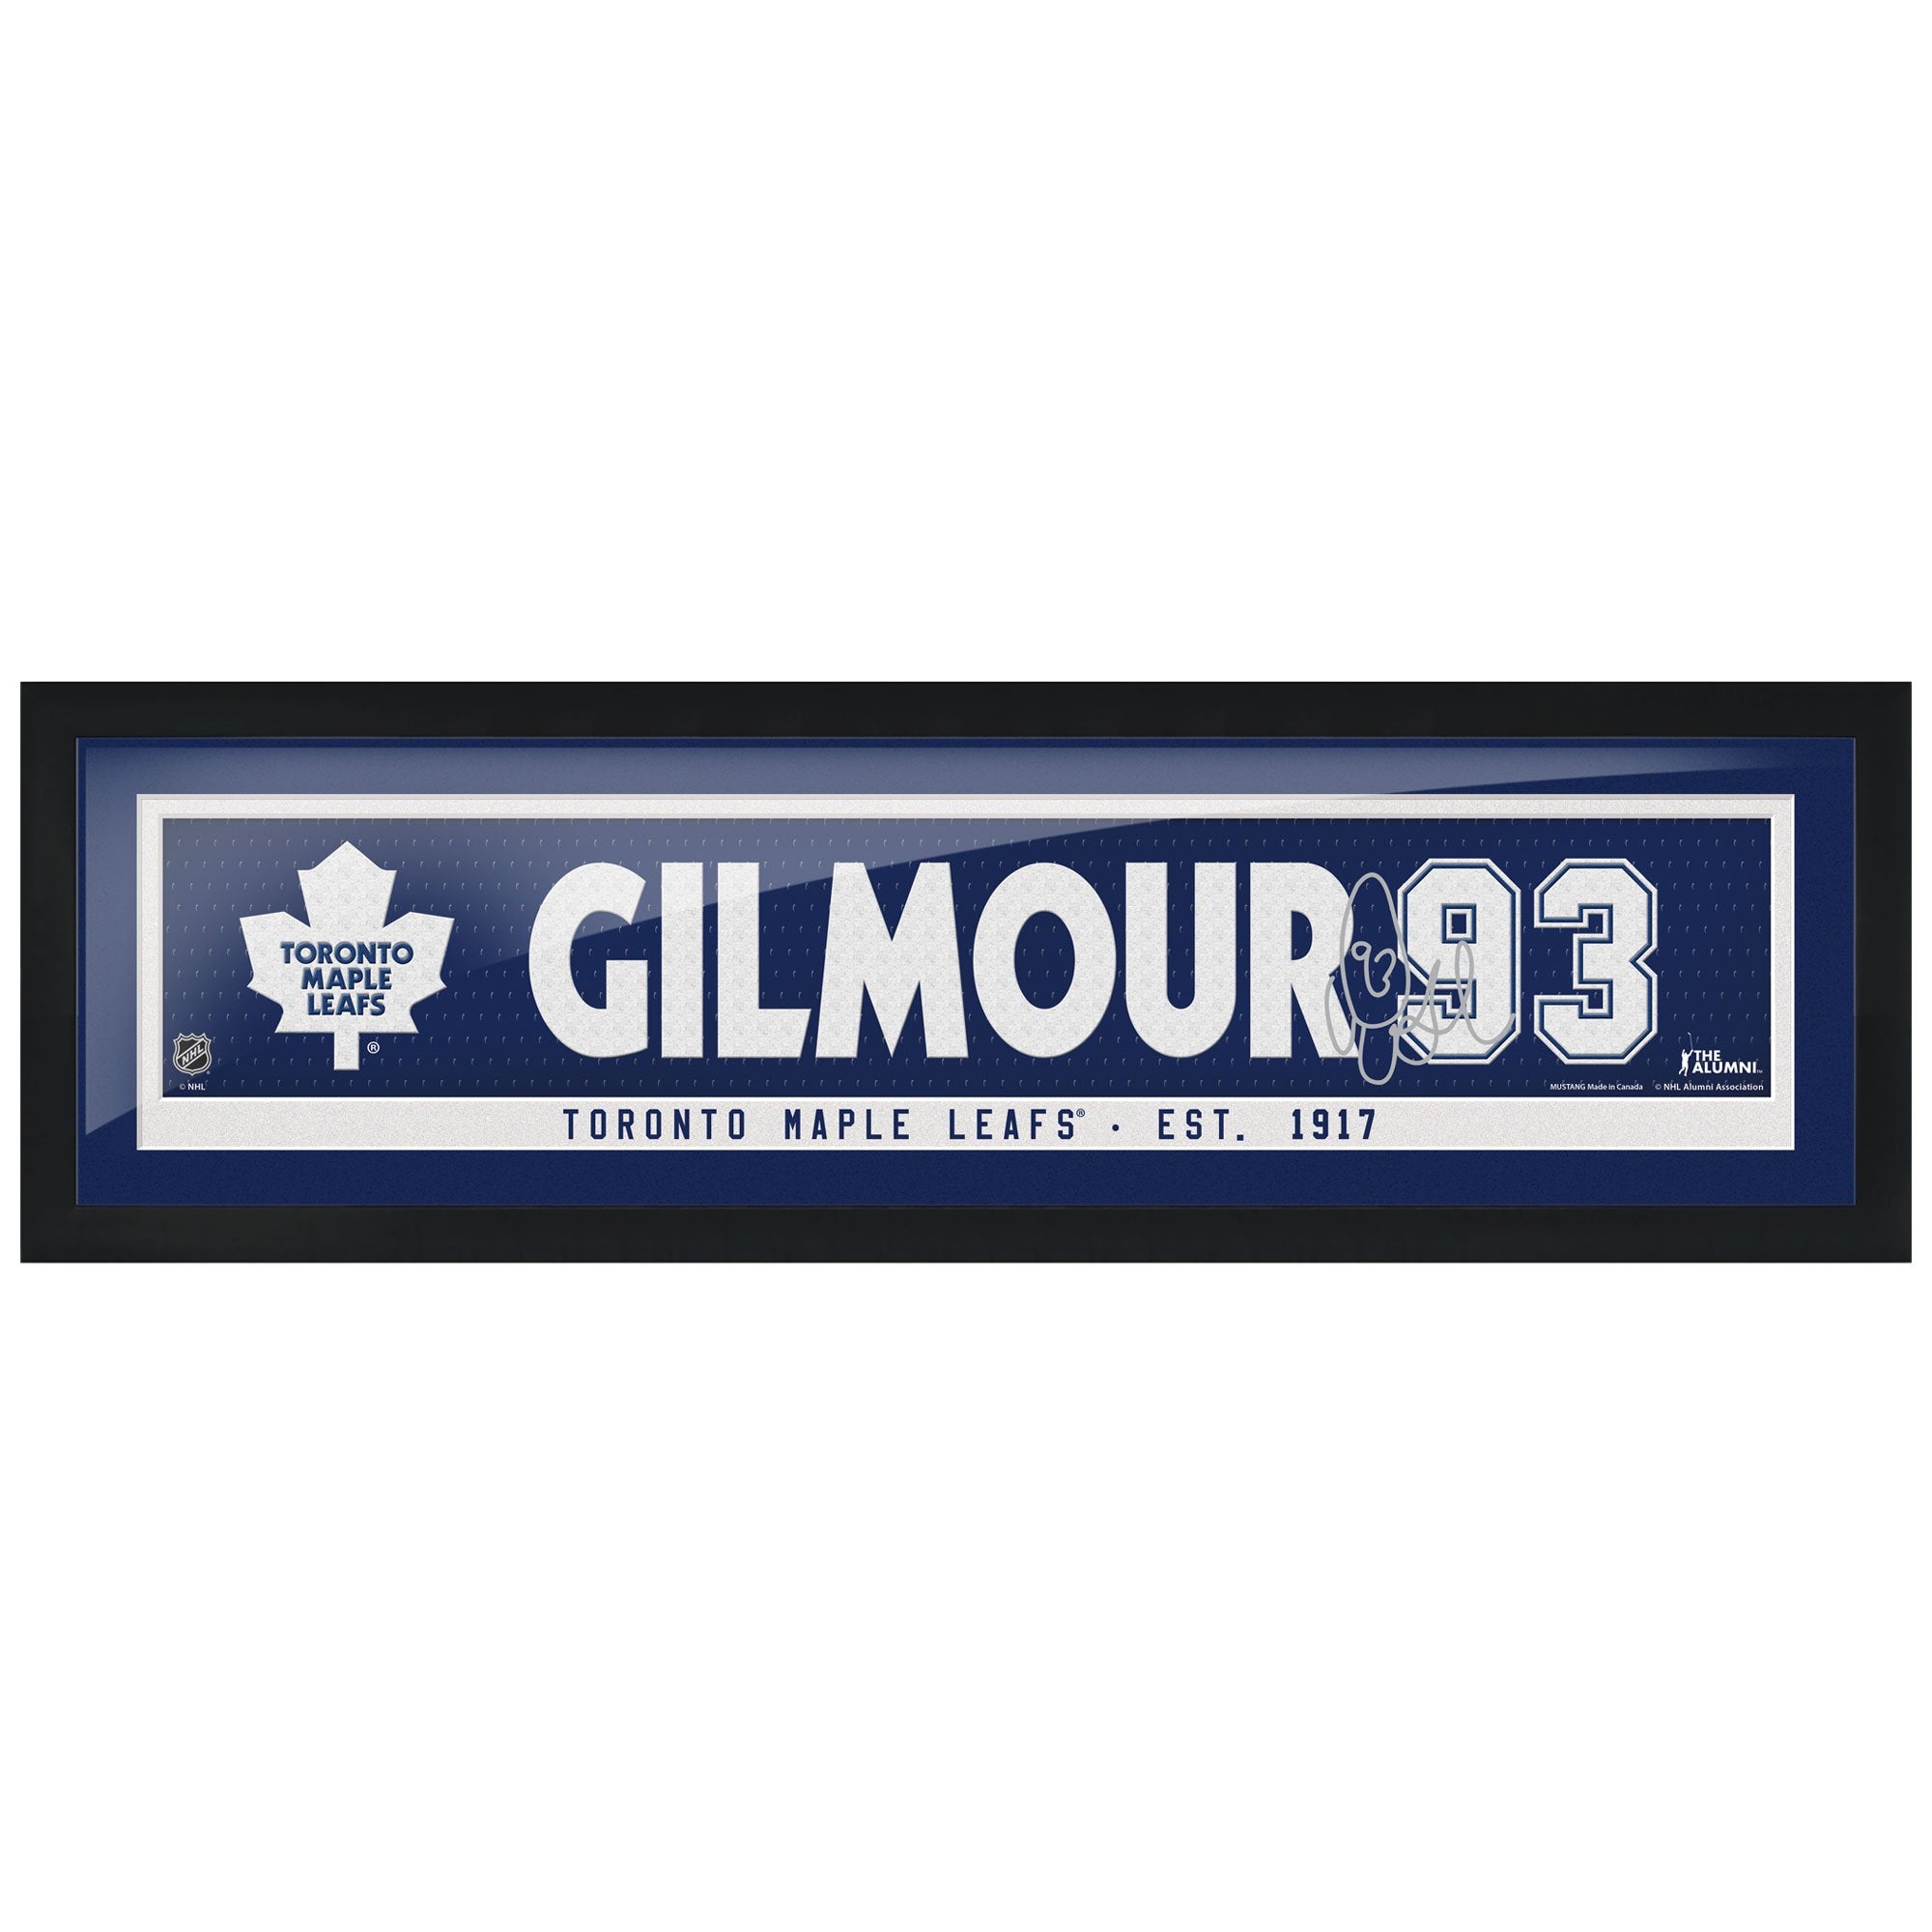 Toronto Maple Leafs Gilmour Alumni Framed Name Bar with Replica Autograph